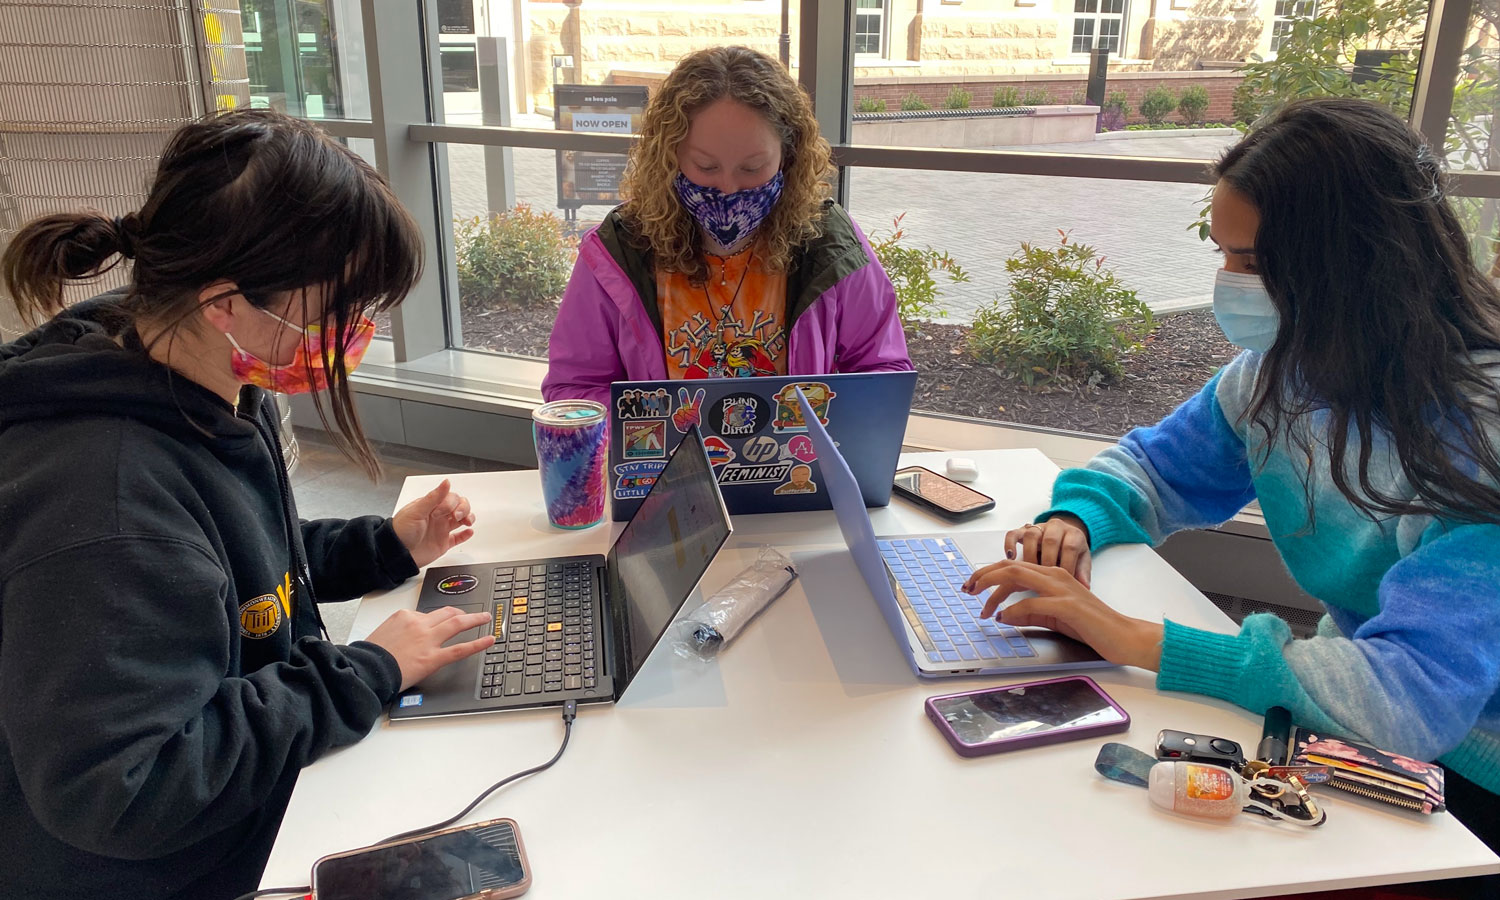 3 female students working on laptops